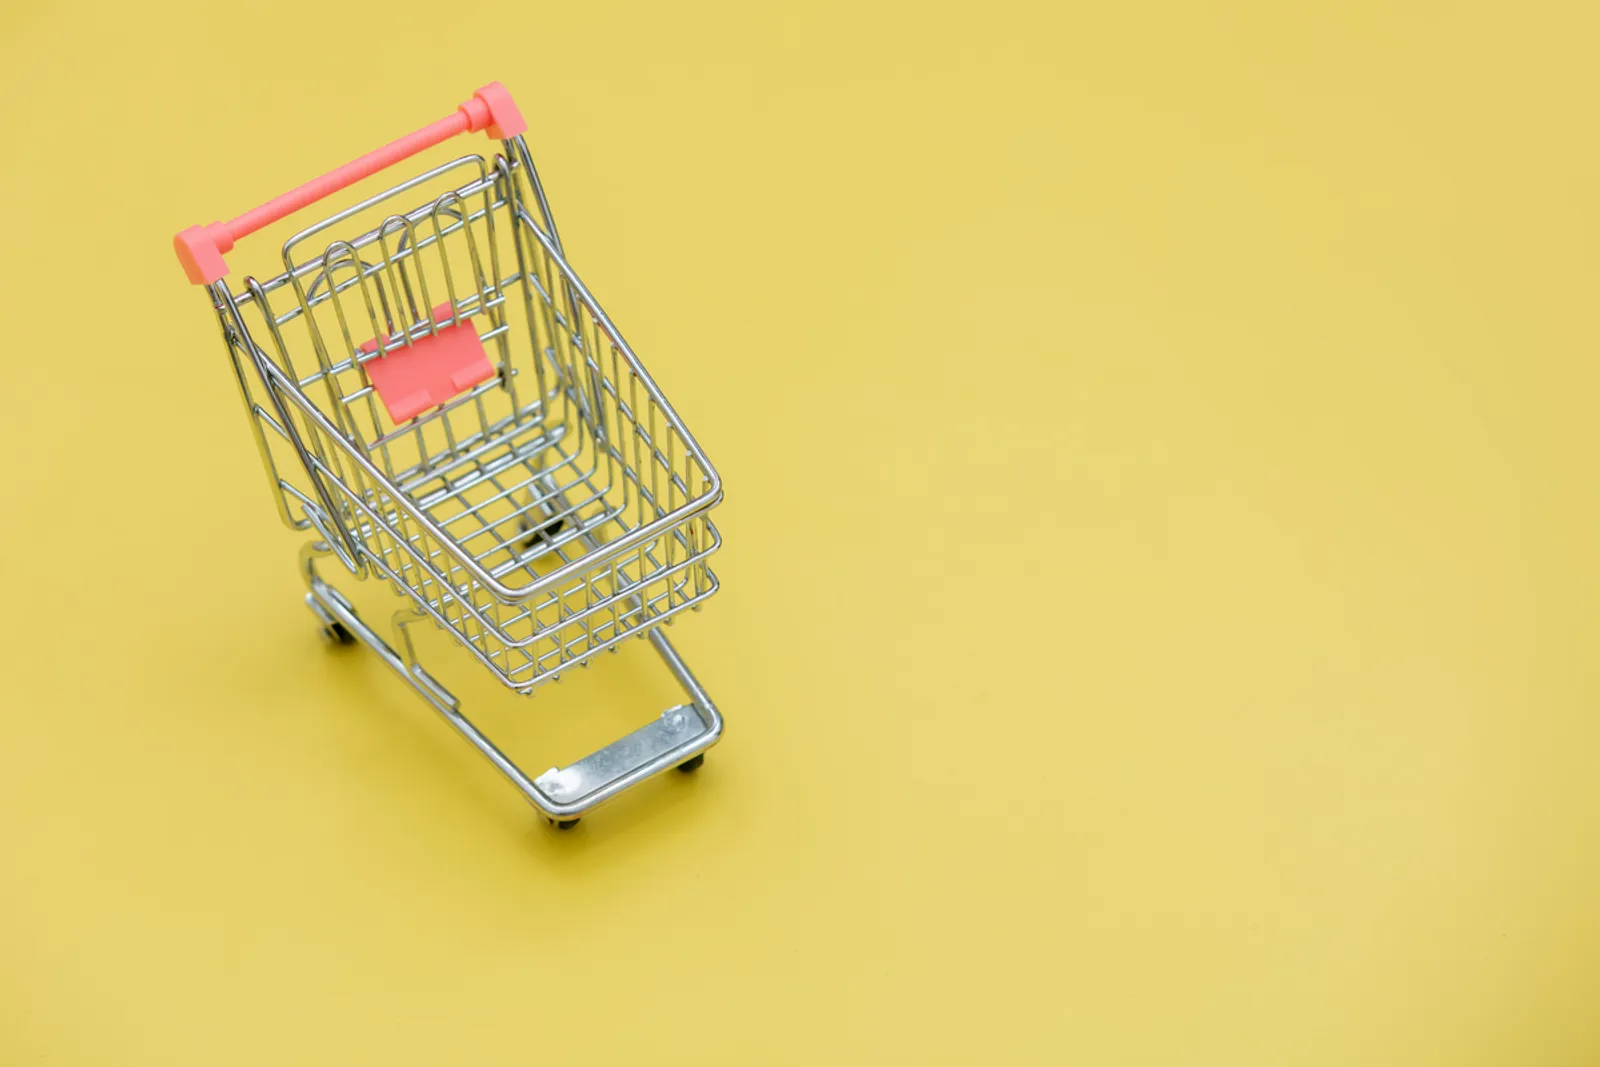 toy shopping trolley on yellow background